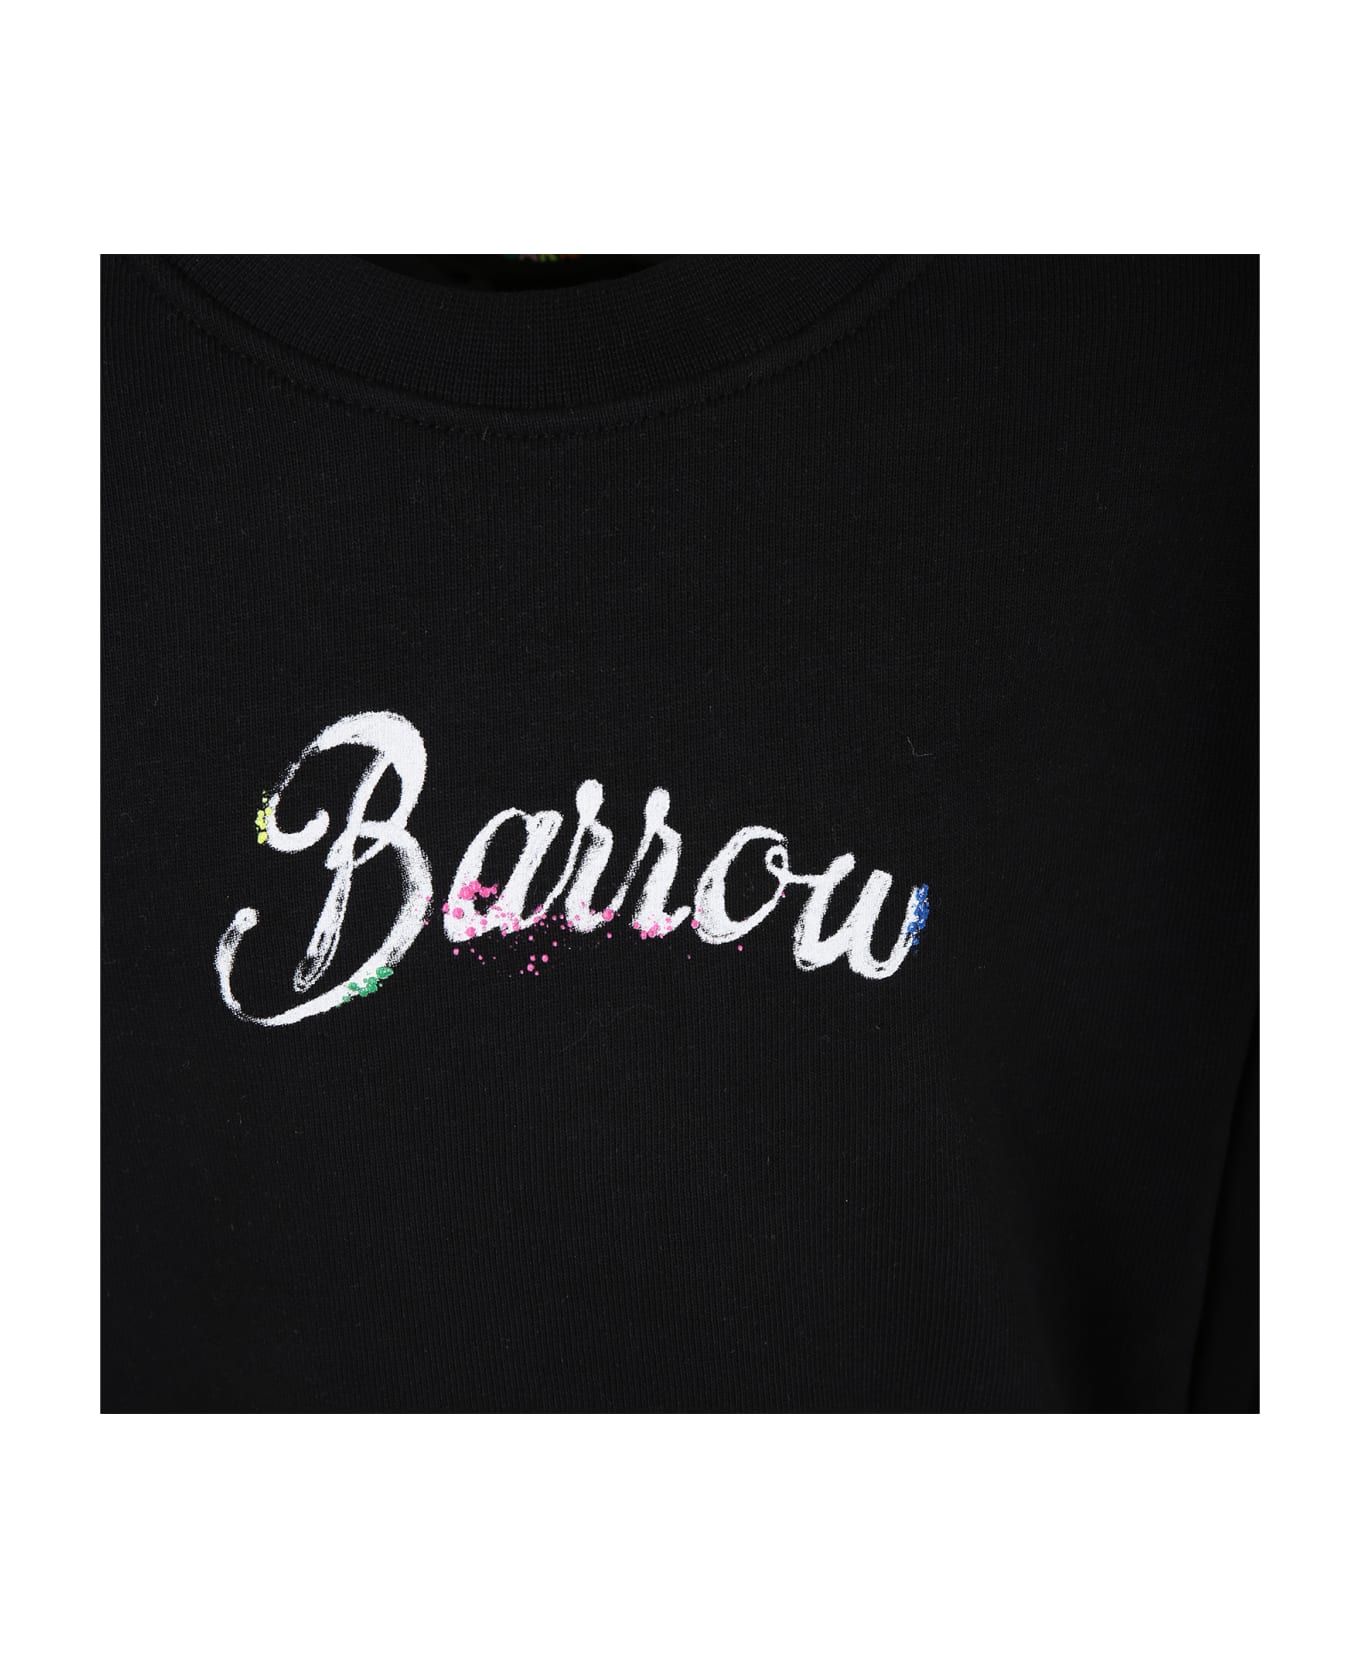 Barrow Black Sweatshirt For Girl With Smiley Face And Logo - Black